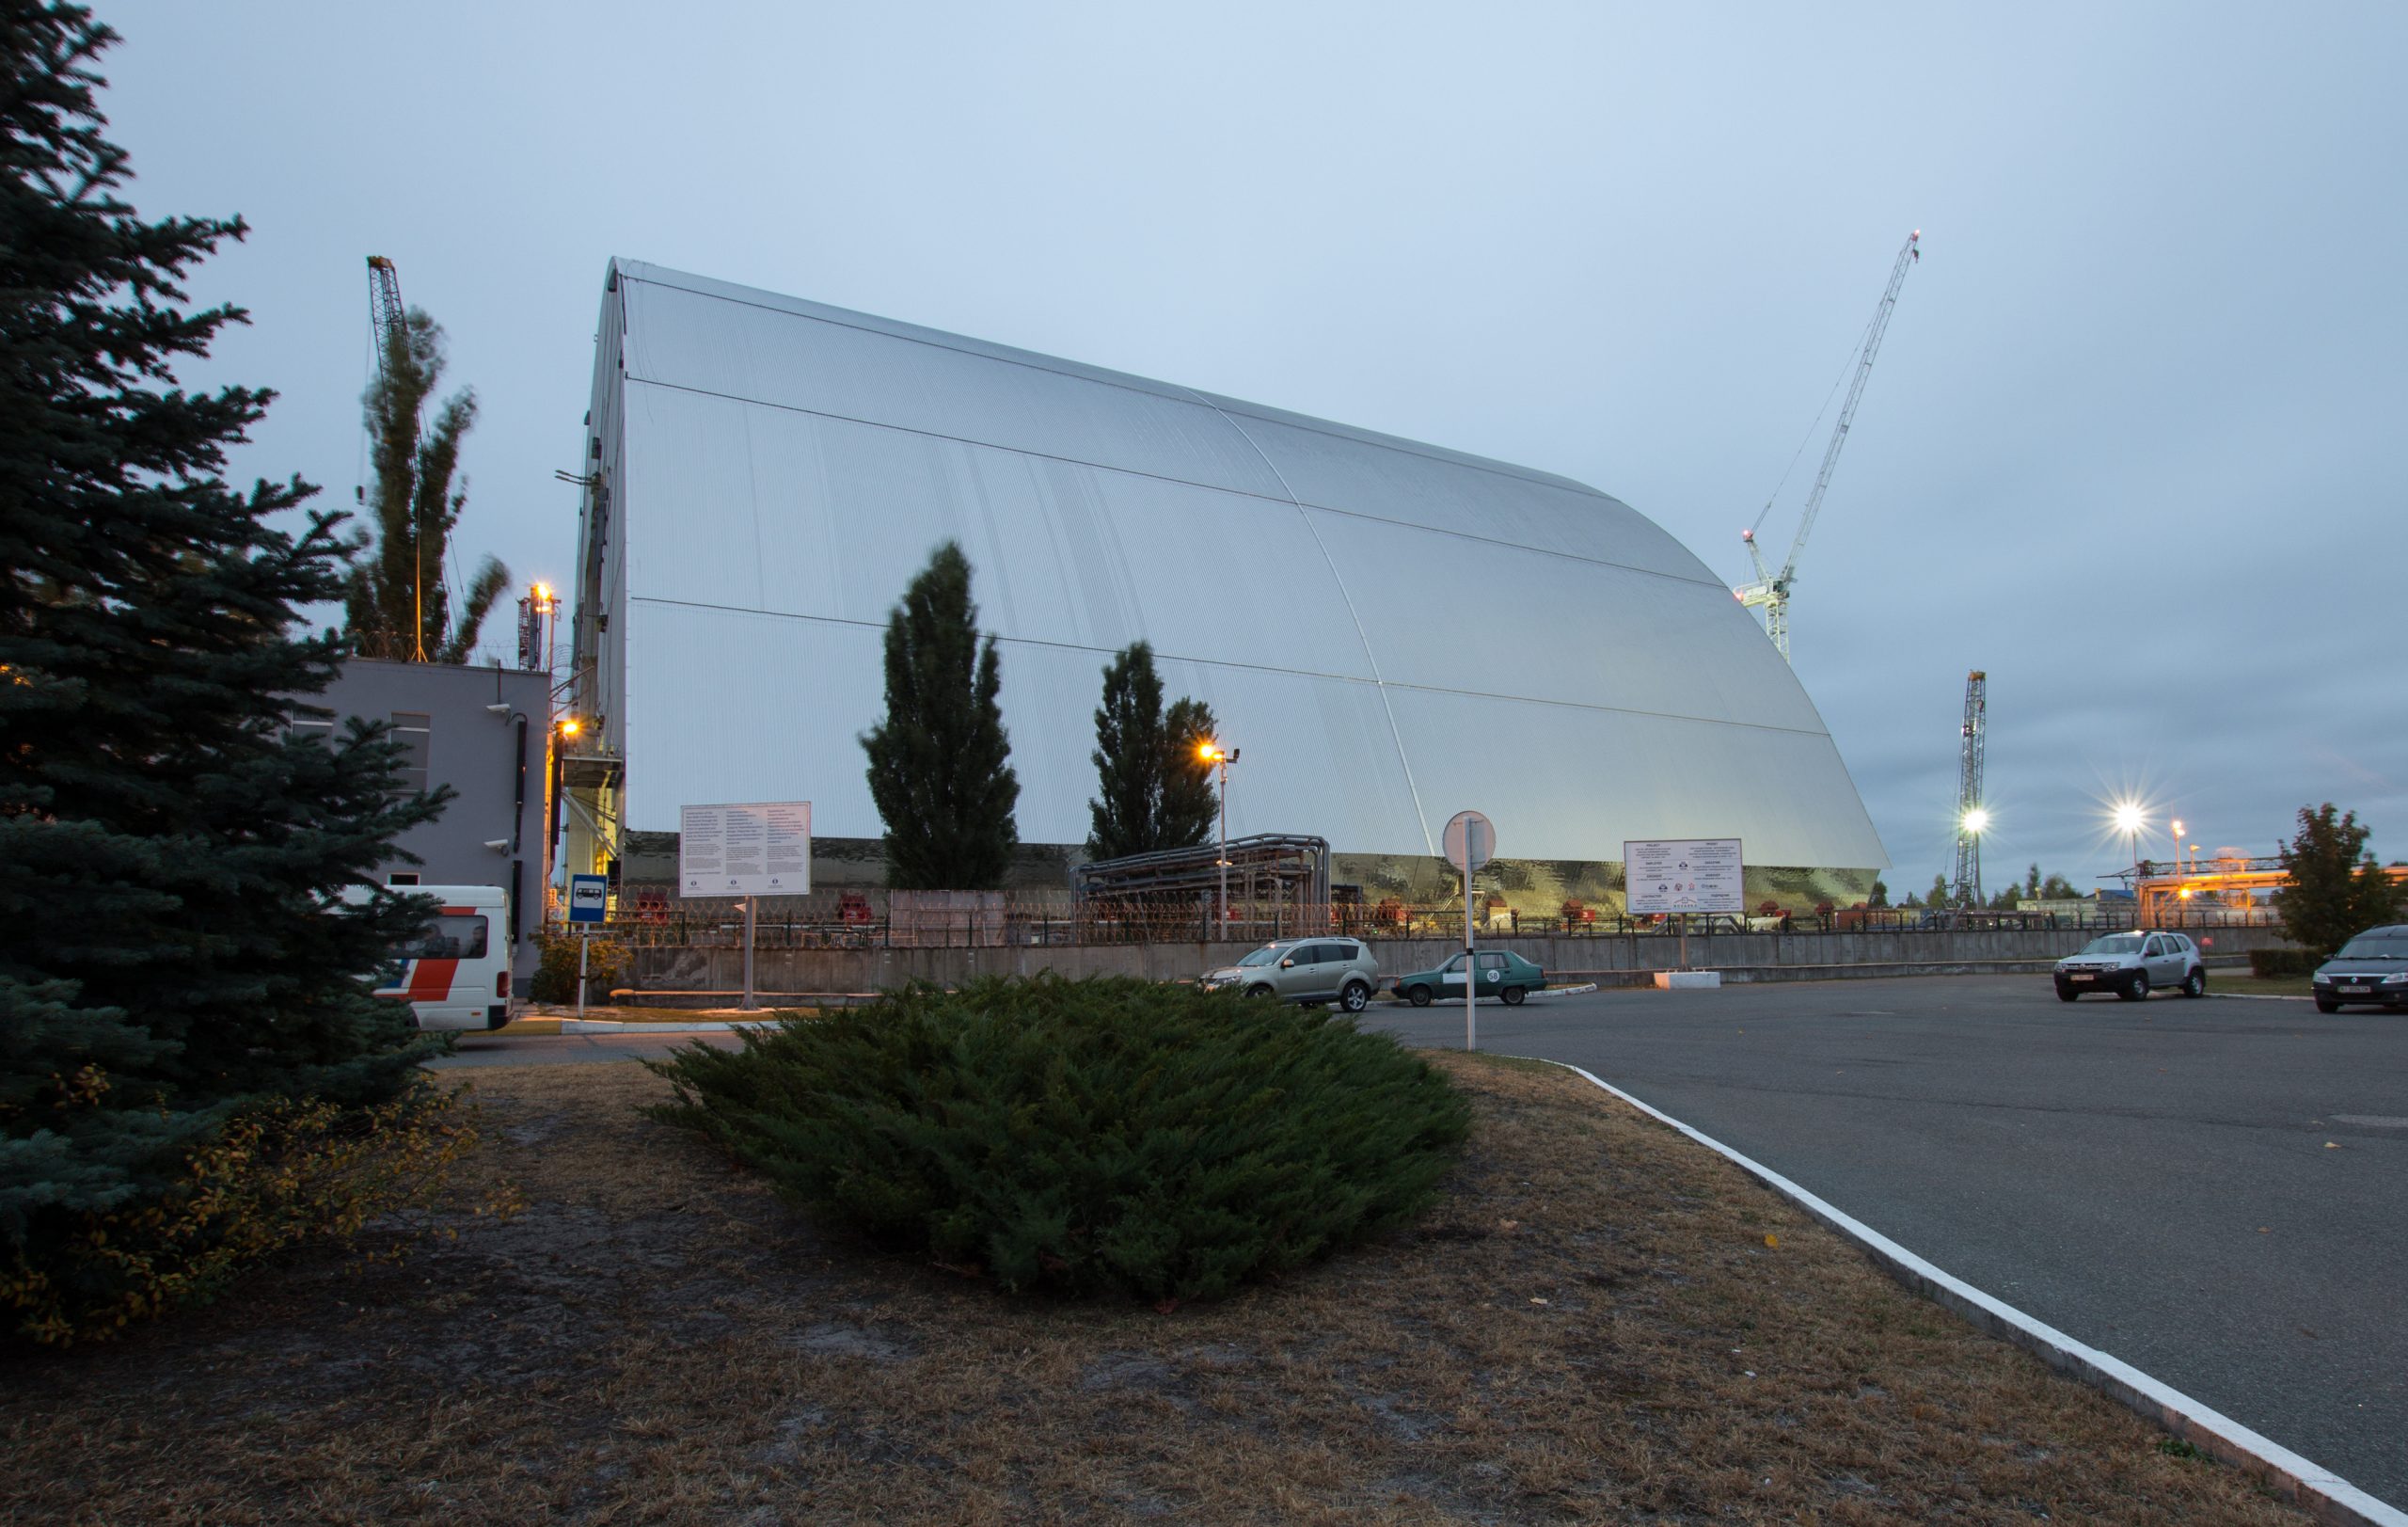 The New Safe Confinement at Chernobyl Nuclear Power Plant nearing completion in October 2016. Photo by Tim Porter.